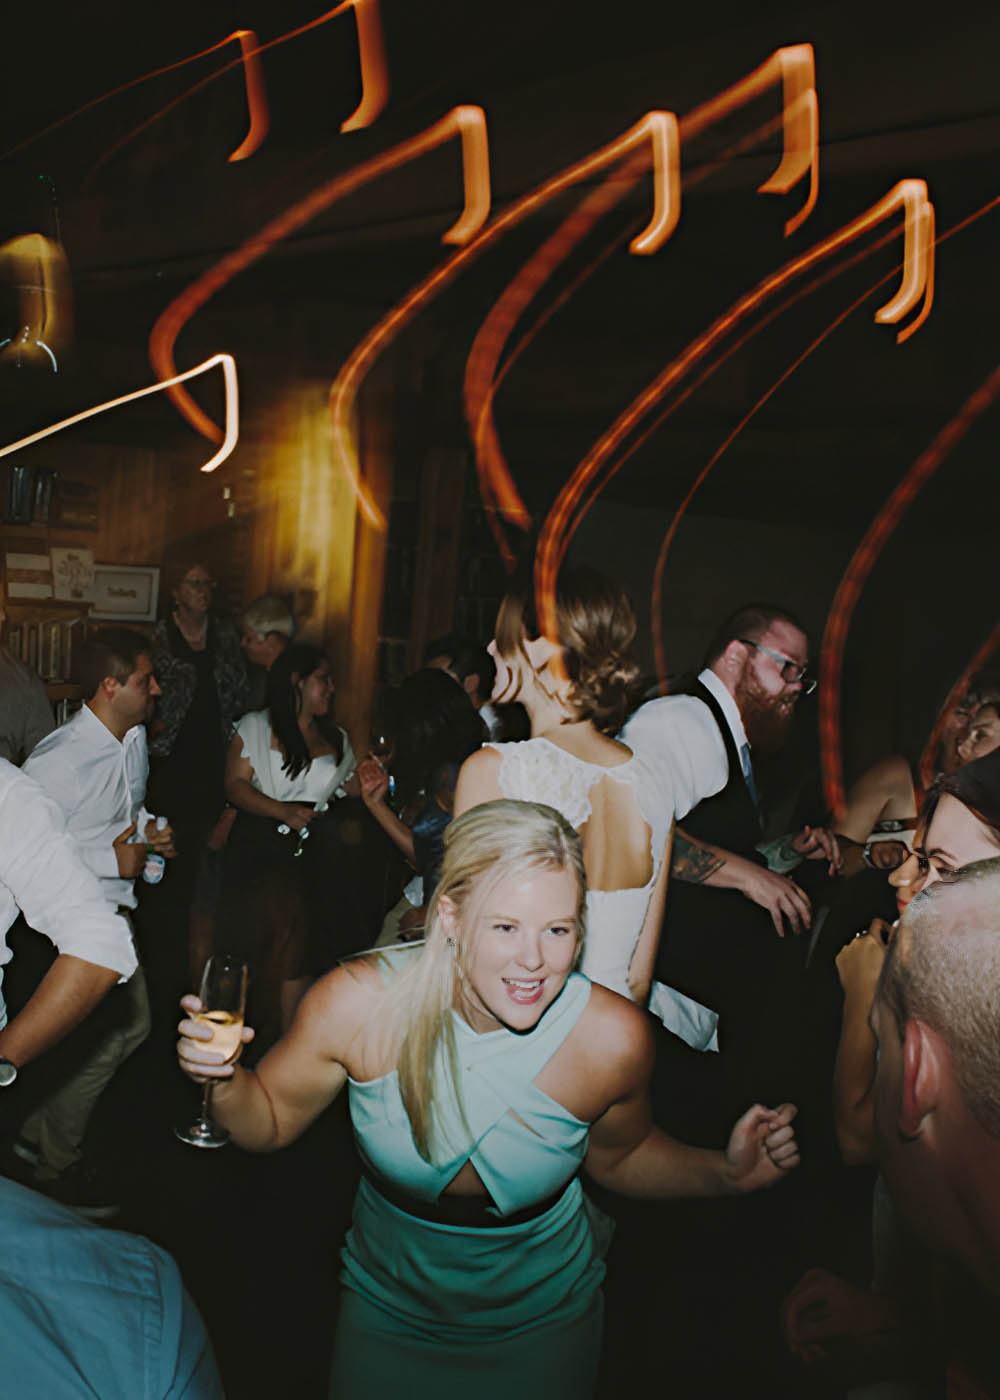 Dancing during a wedding reception